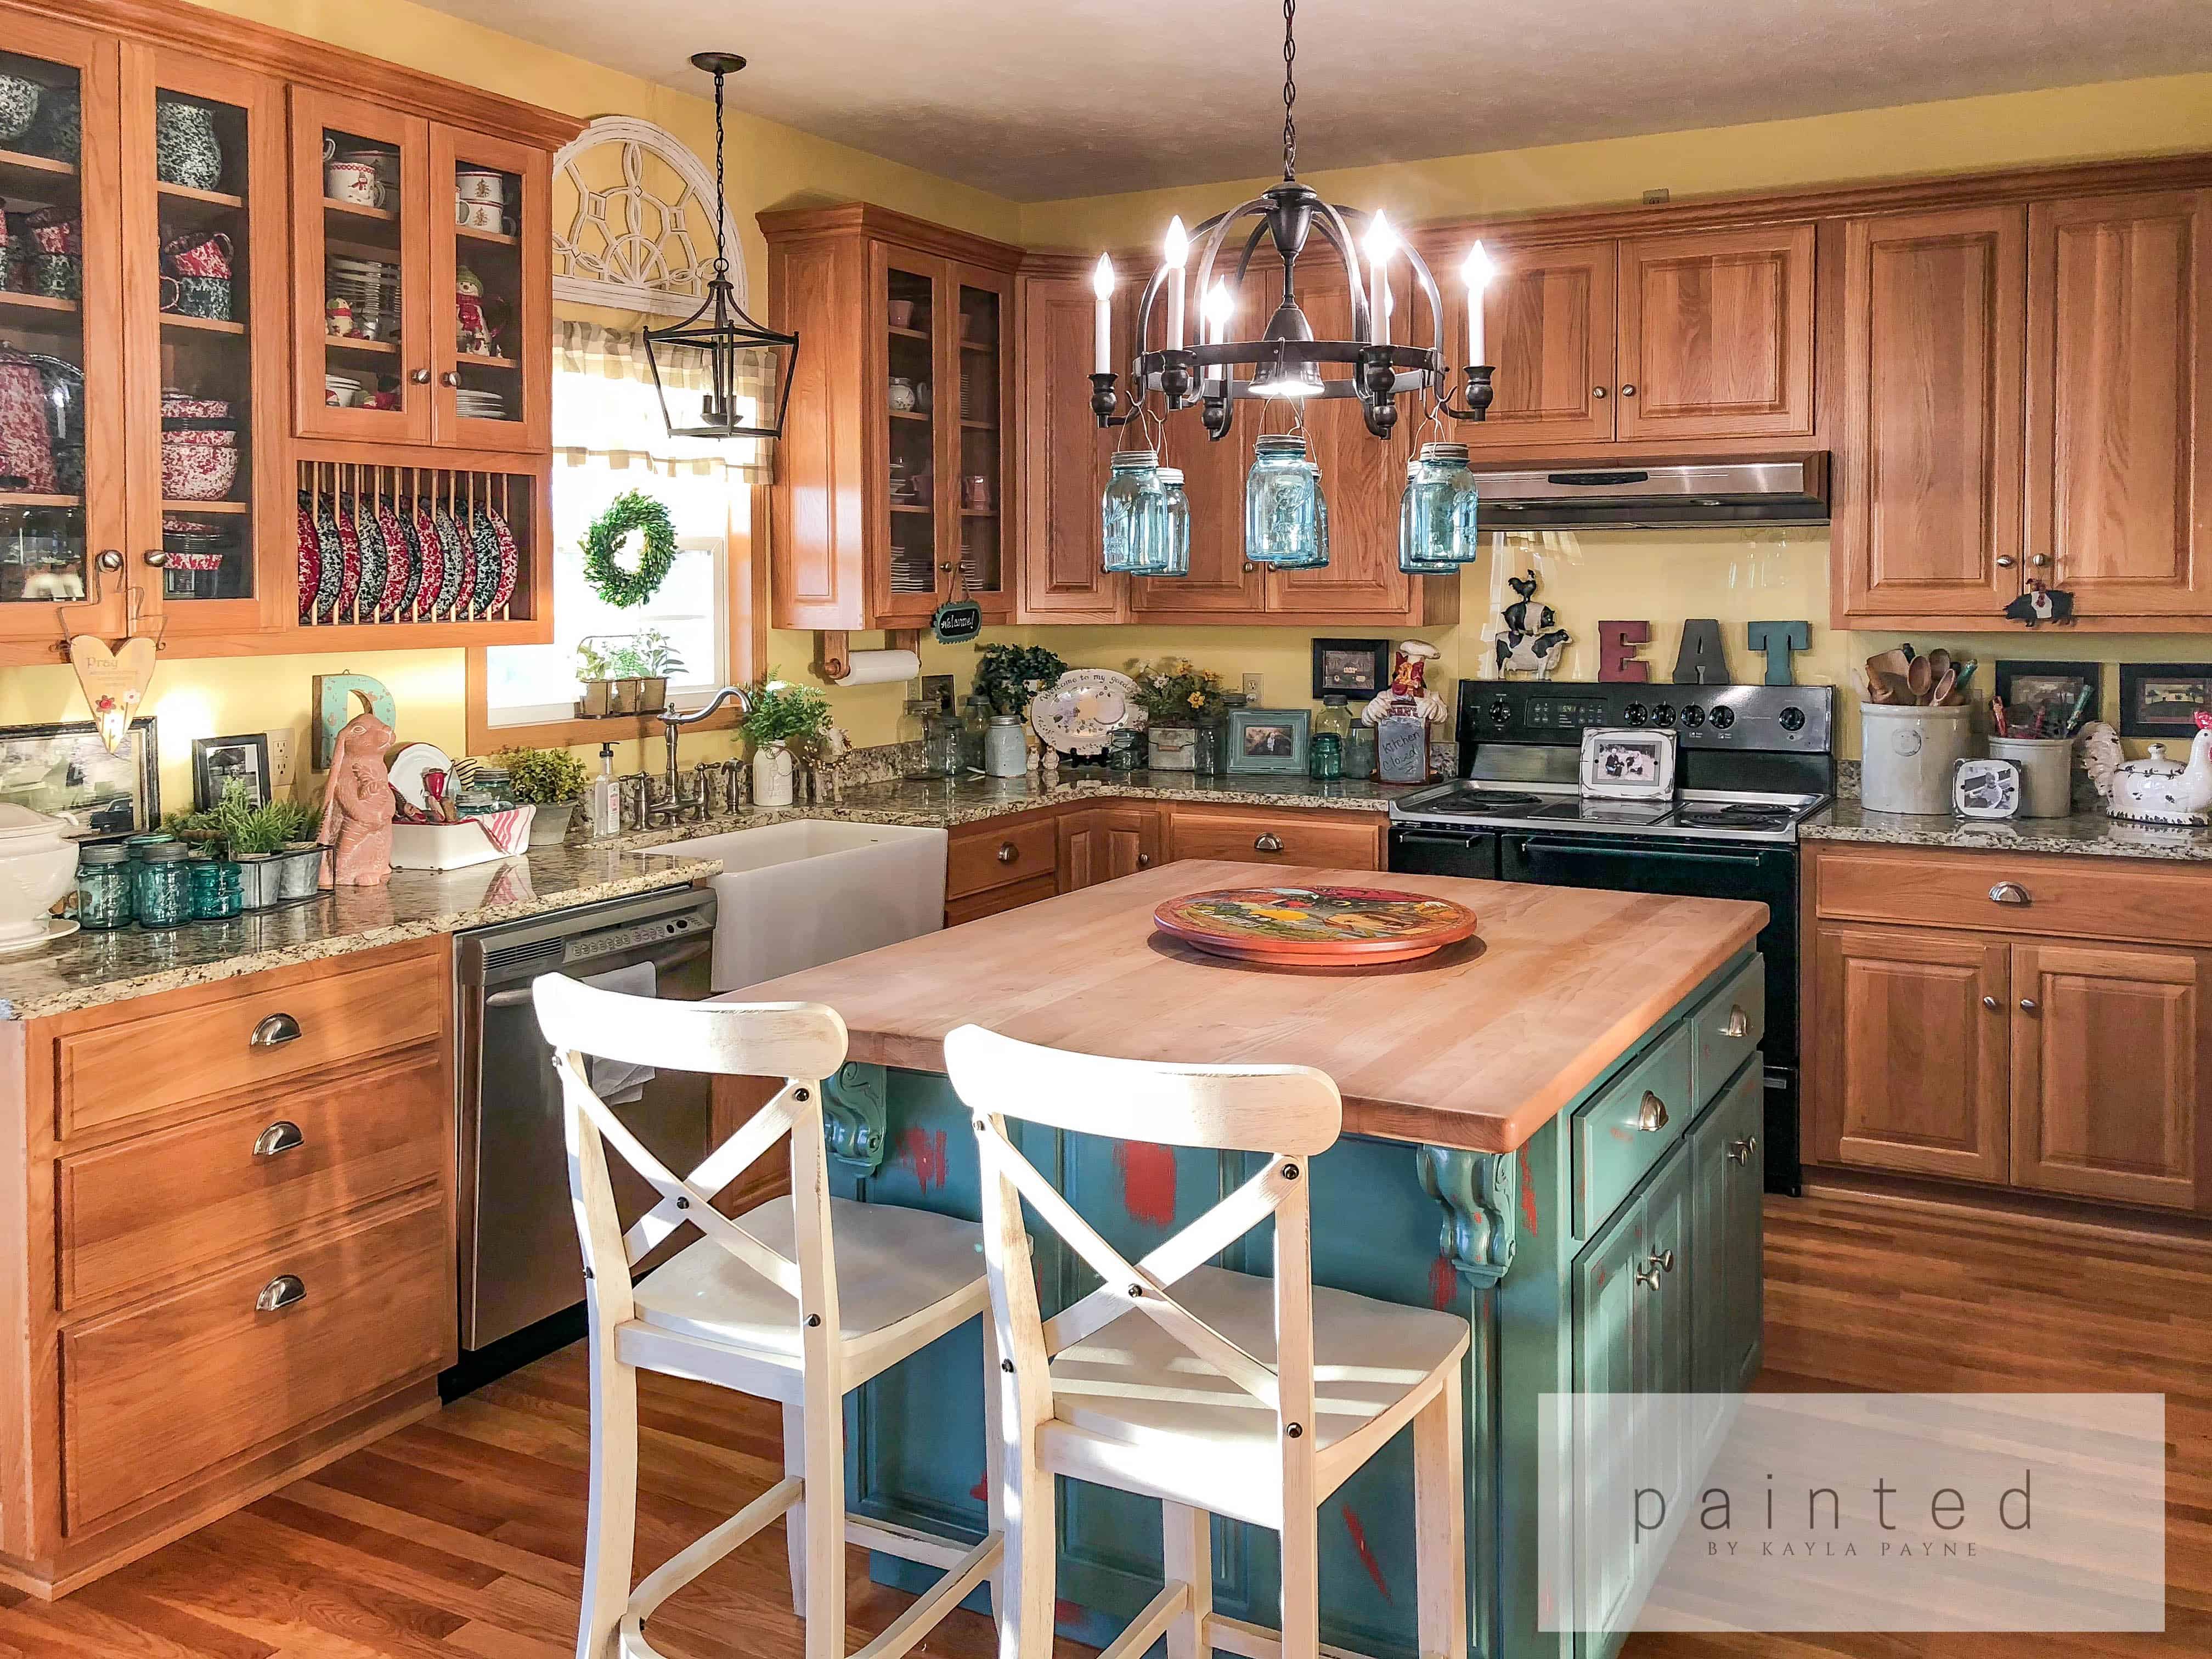 How To Paint Kitchen Cabinets How To Paint Oak Cabinets Honey